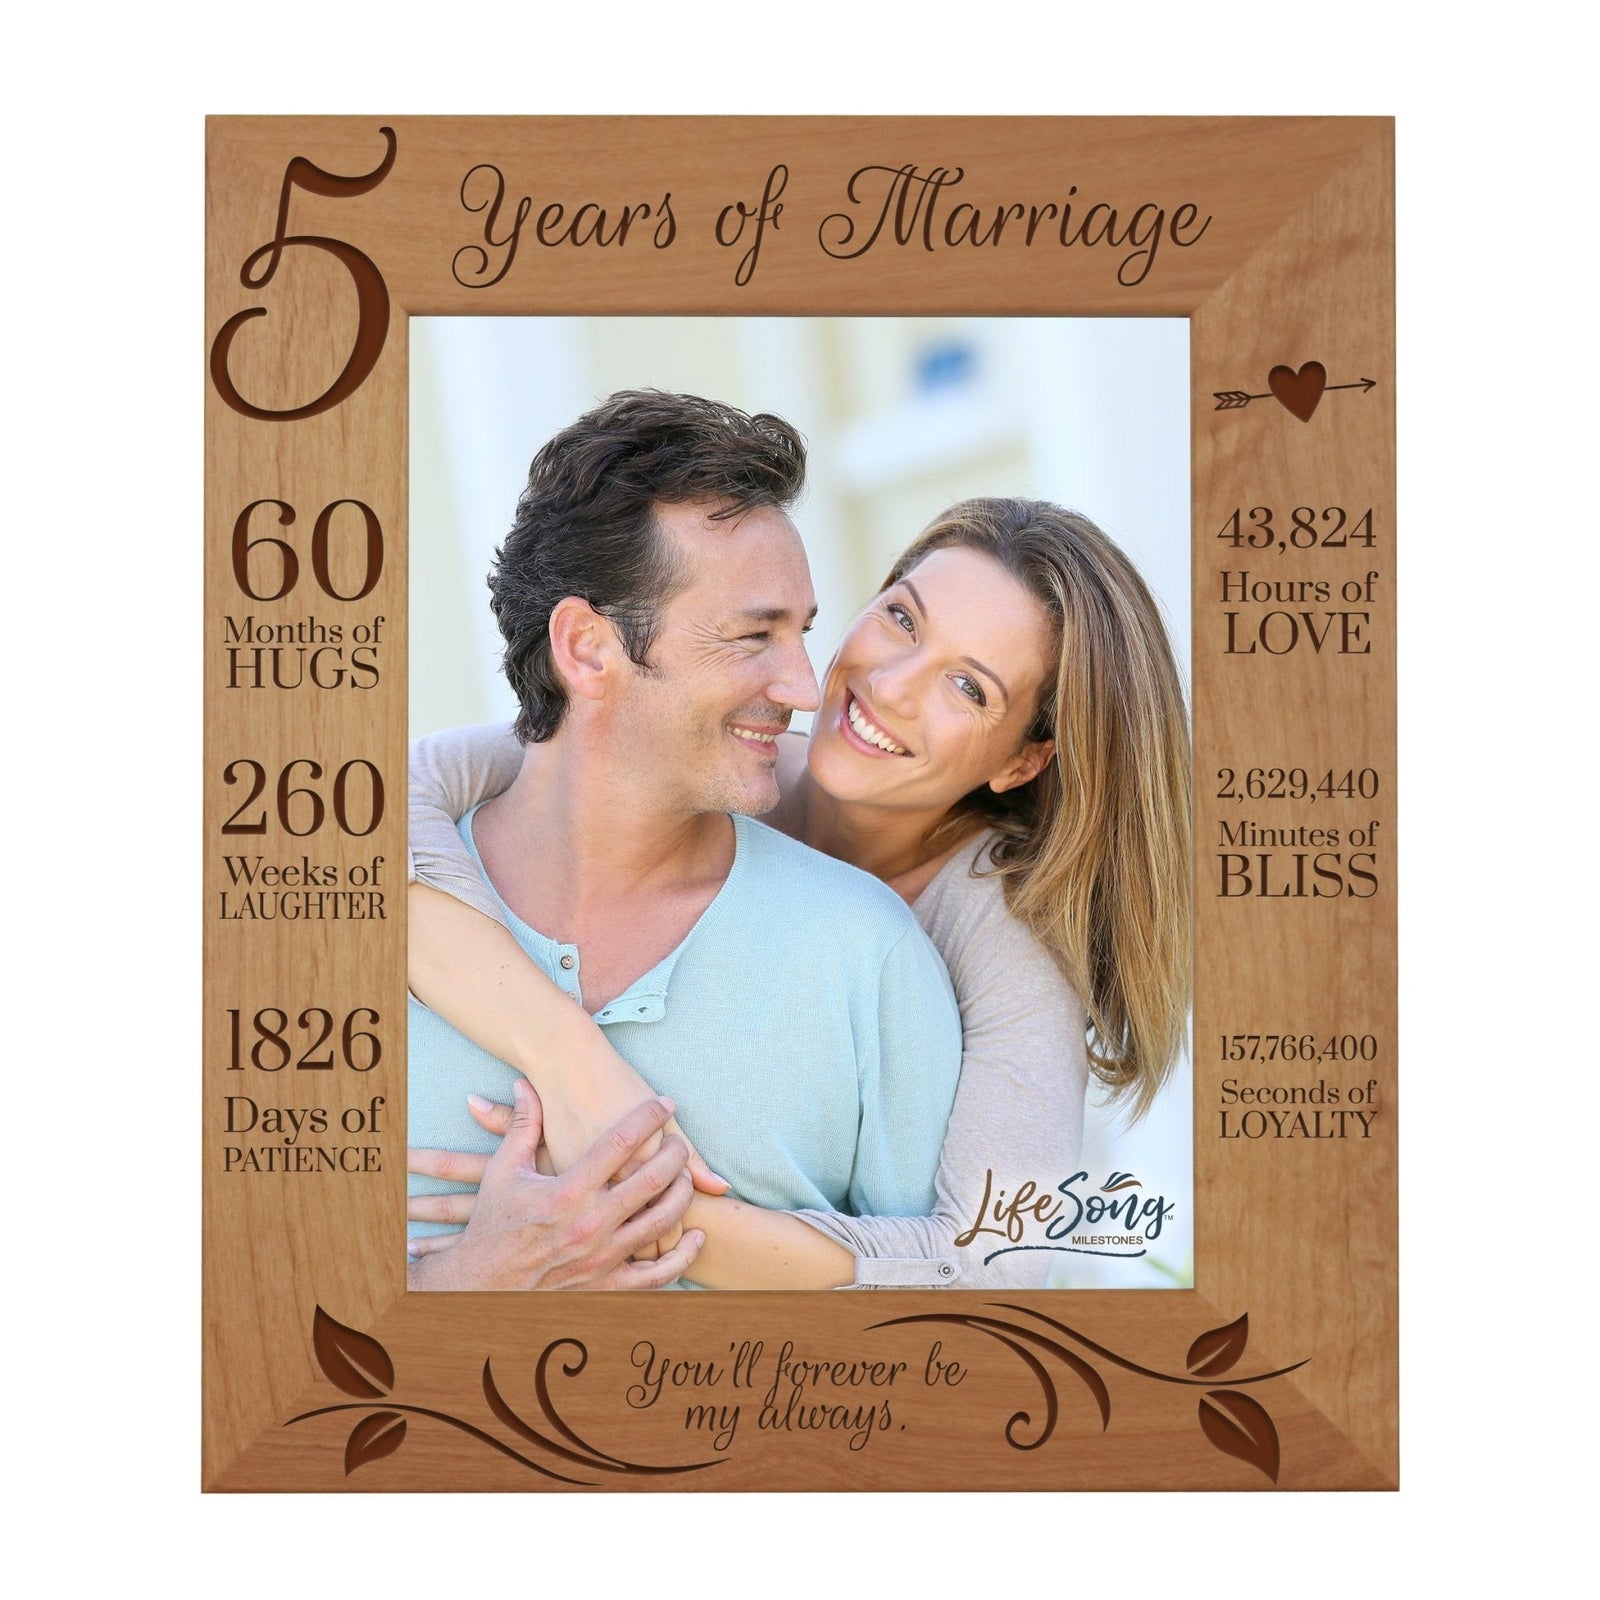 Couples 5th Wedding Anniversary Photo Frame Home Decor Gift Ideas - Forever Be My Always - LifeSong Milestones